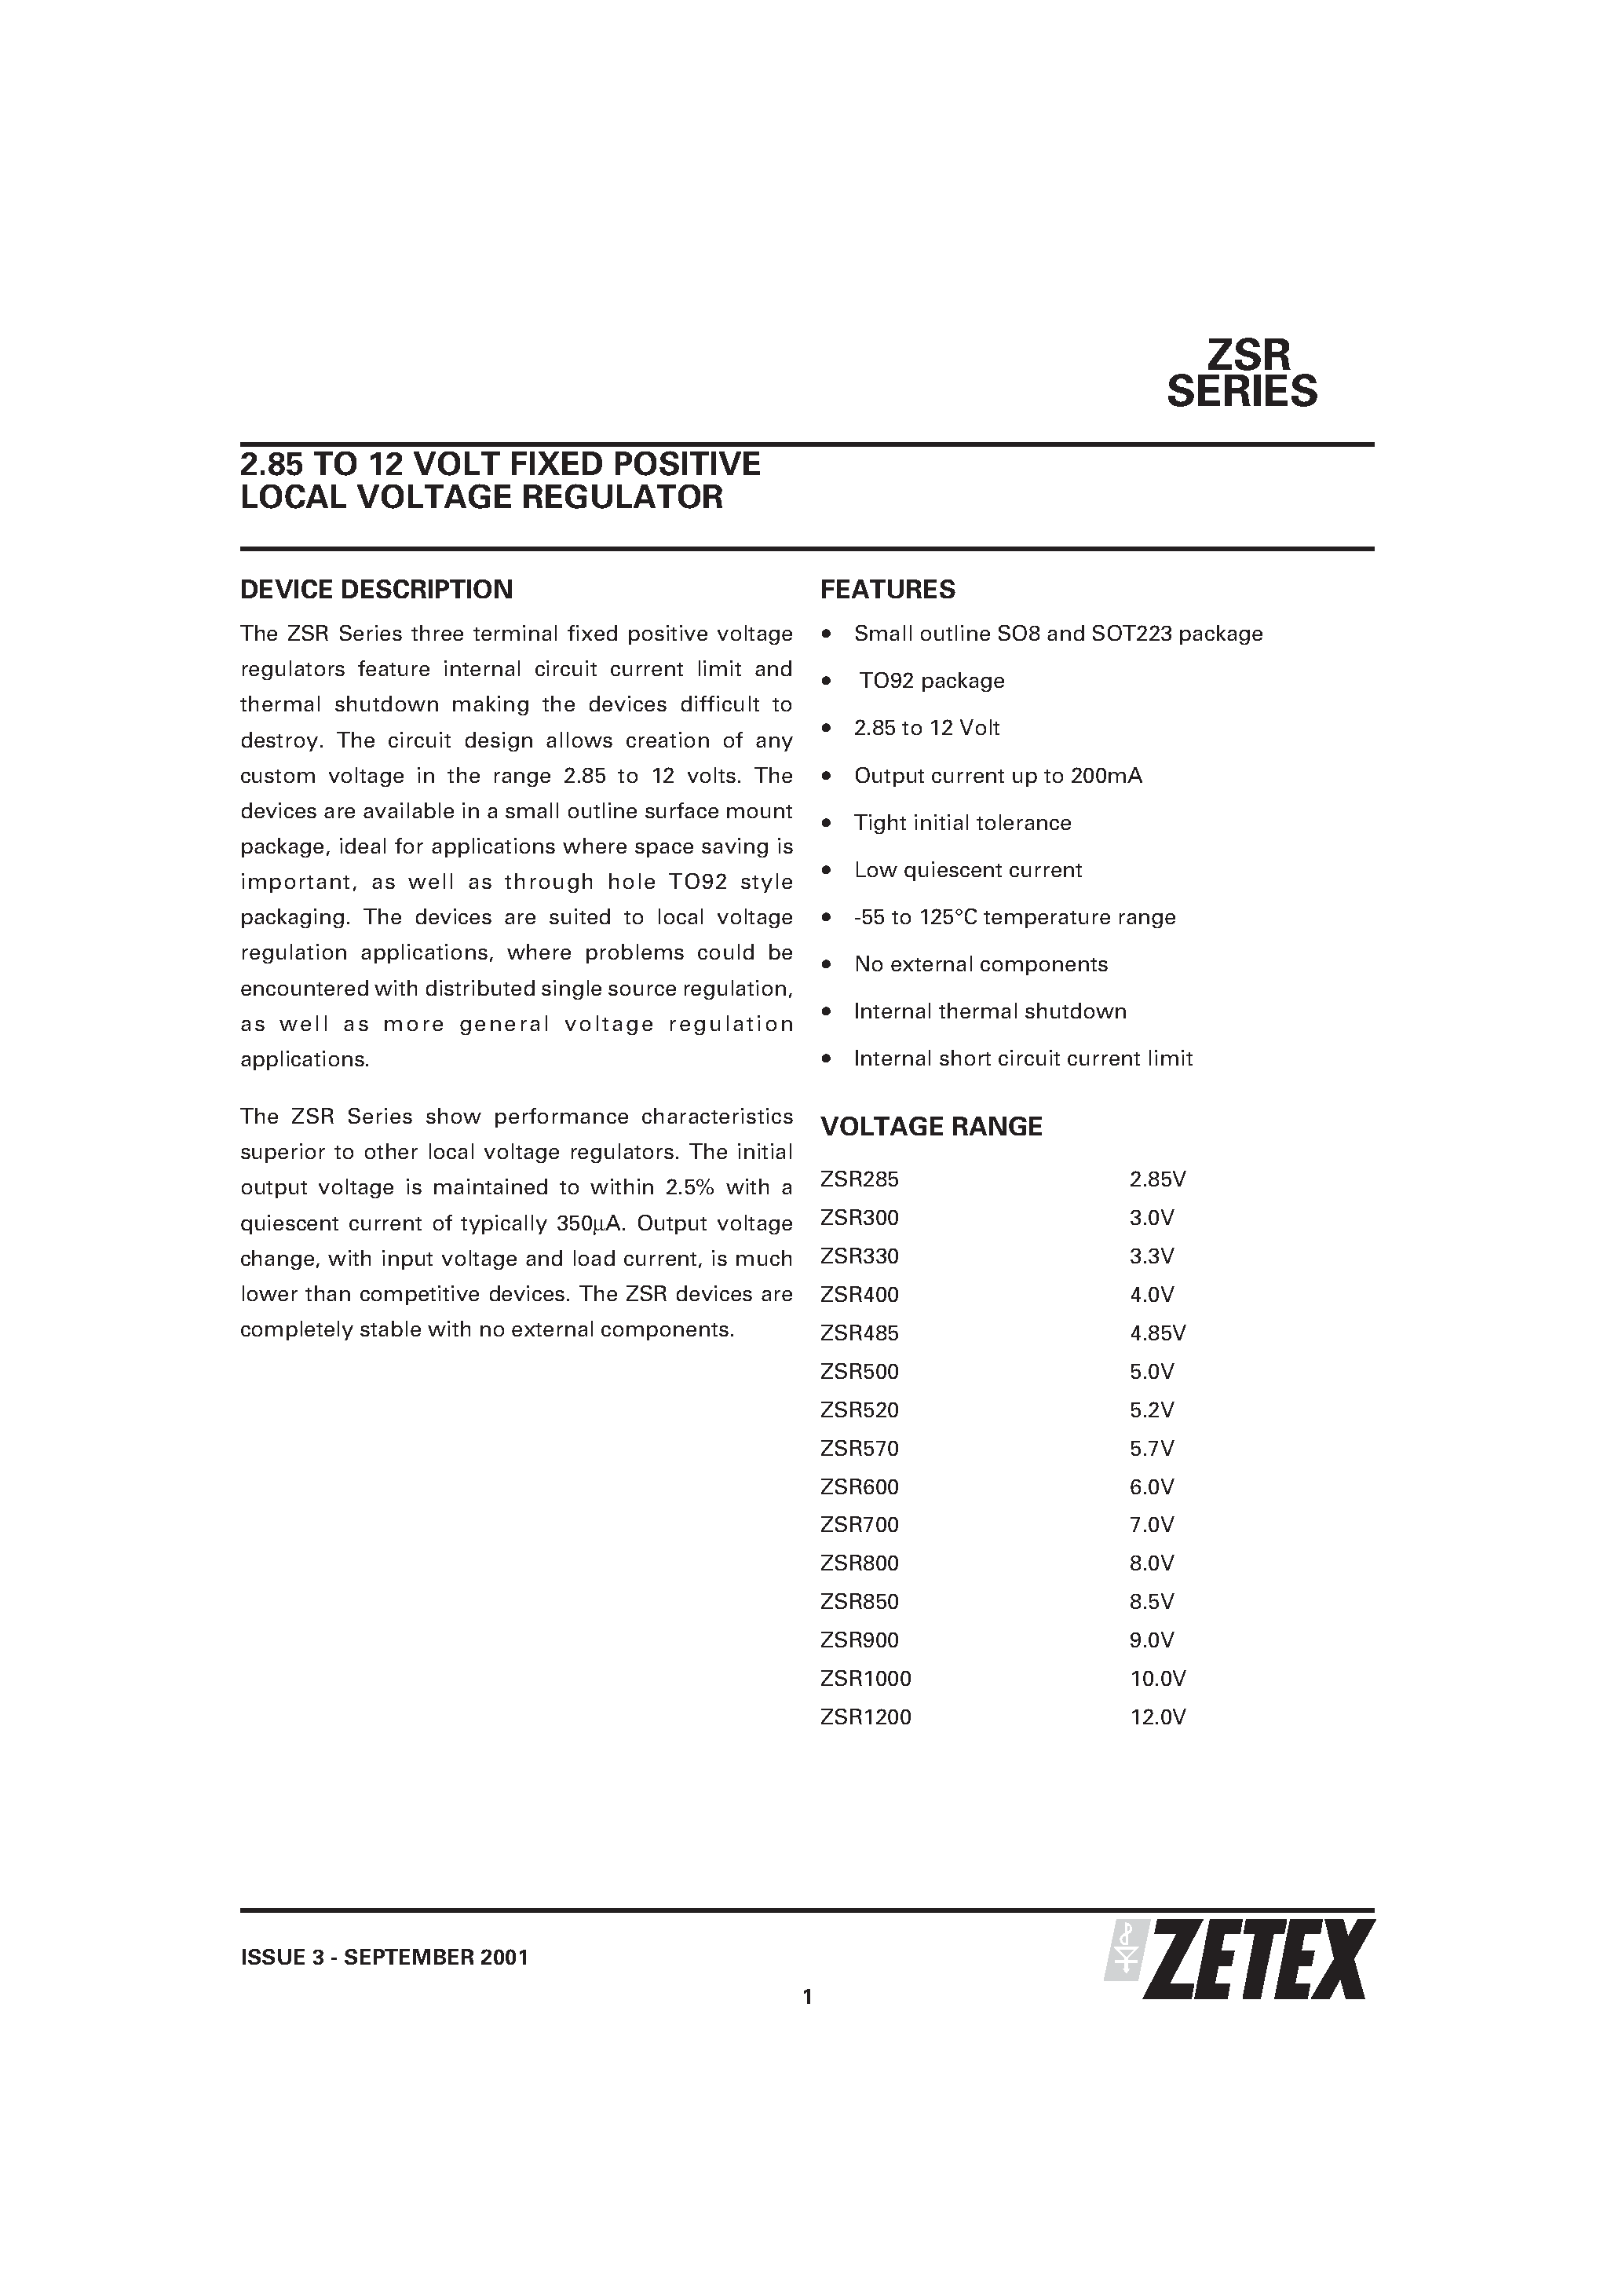 Datasheet ZSR900 - 2.85 TO 12 VOLT FIXED POSITIVE LOCAL VOLTAGE REGULATOR page 1